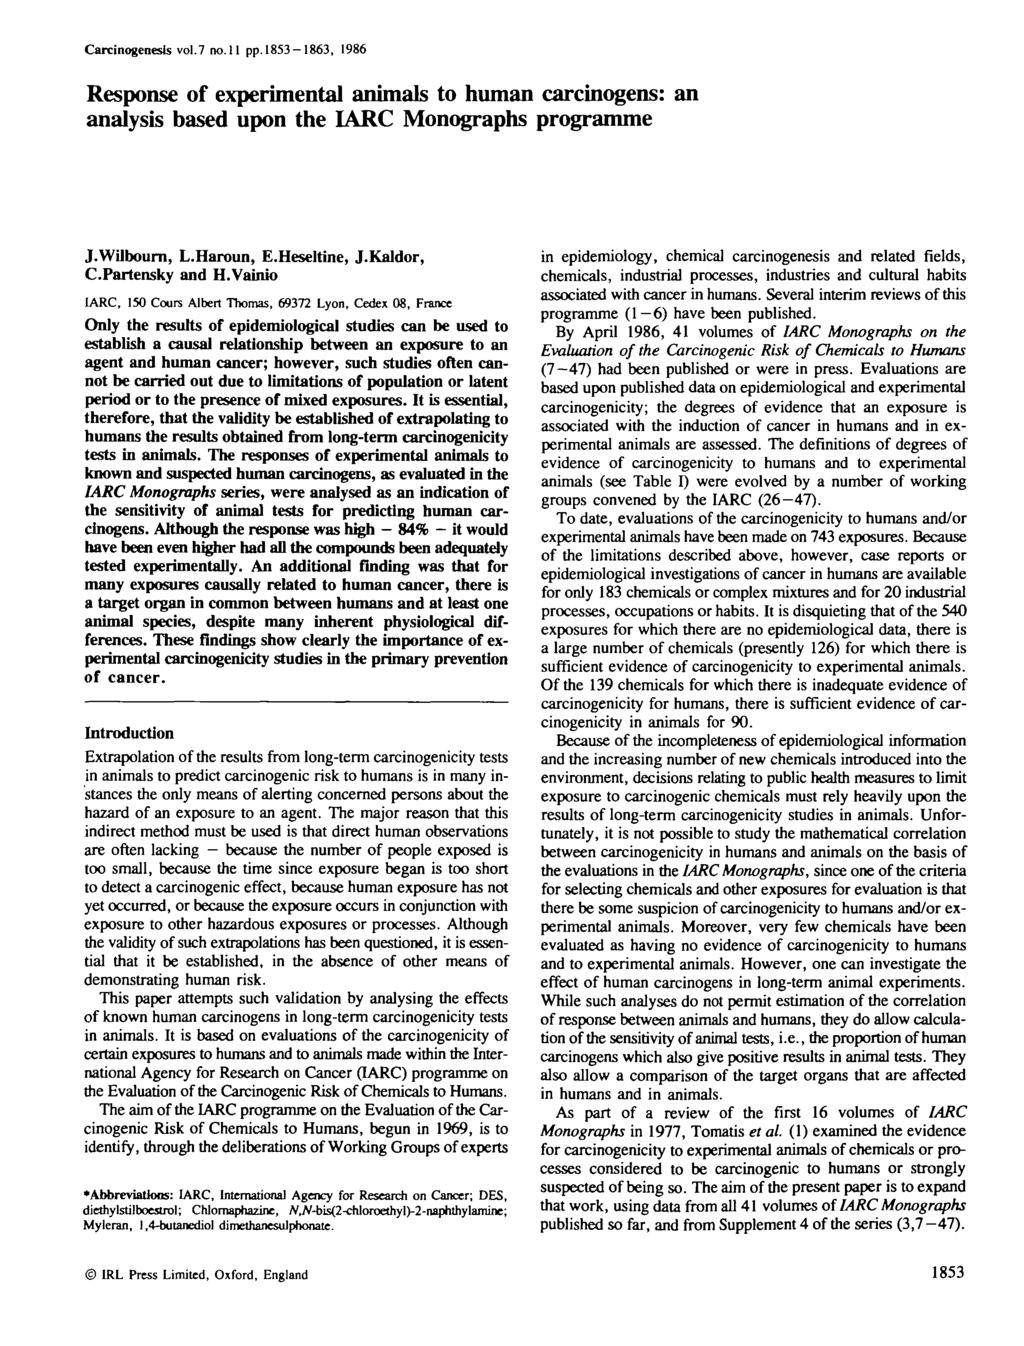 Carcinogenesls vol.7 no.ll pp. 1853-1863, 1986 Response of experimental animals to human carcinogens: an analysis based upon the IARC Monographs programme J.Wilbourn, L.Haroun, E.Heseltine, J.